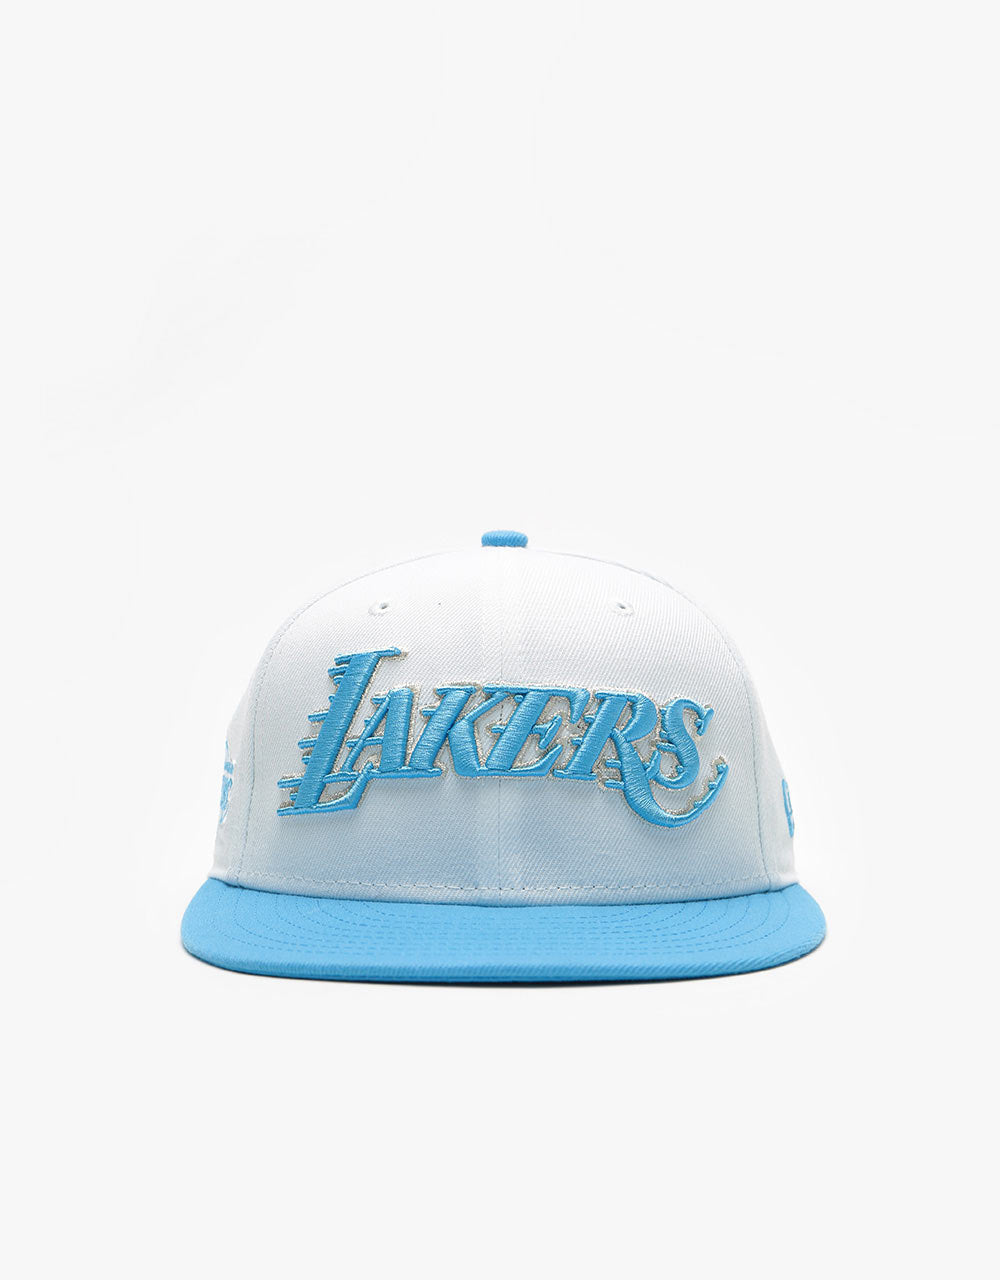 New Era 9Fifty Los Angeles Lakers City Series Official Snapback Cap -